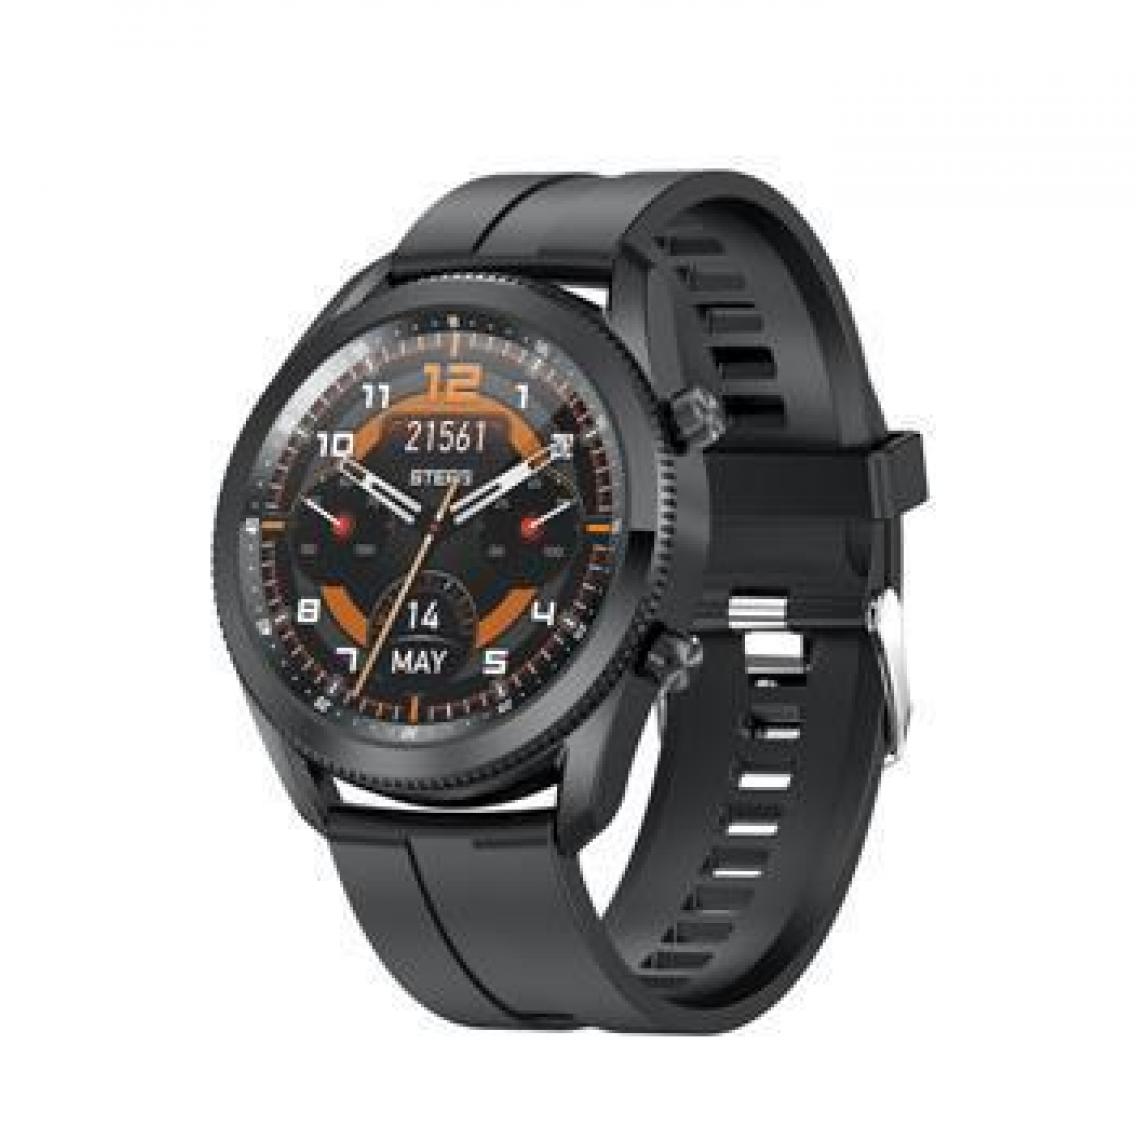 Chronotech Montres - Chronus Waterproof Smart Watch Full HD Touch Screen Sport Band with Multi Usage Heart Rate Detection(black) - Montre connectée